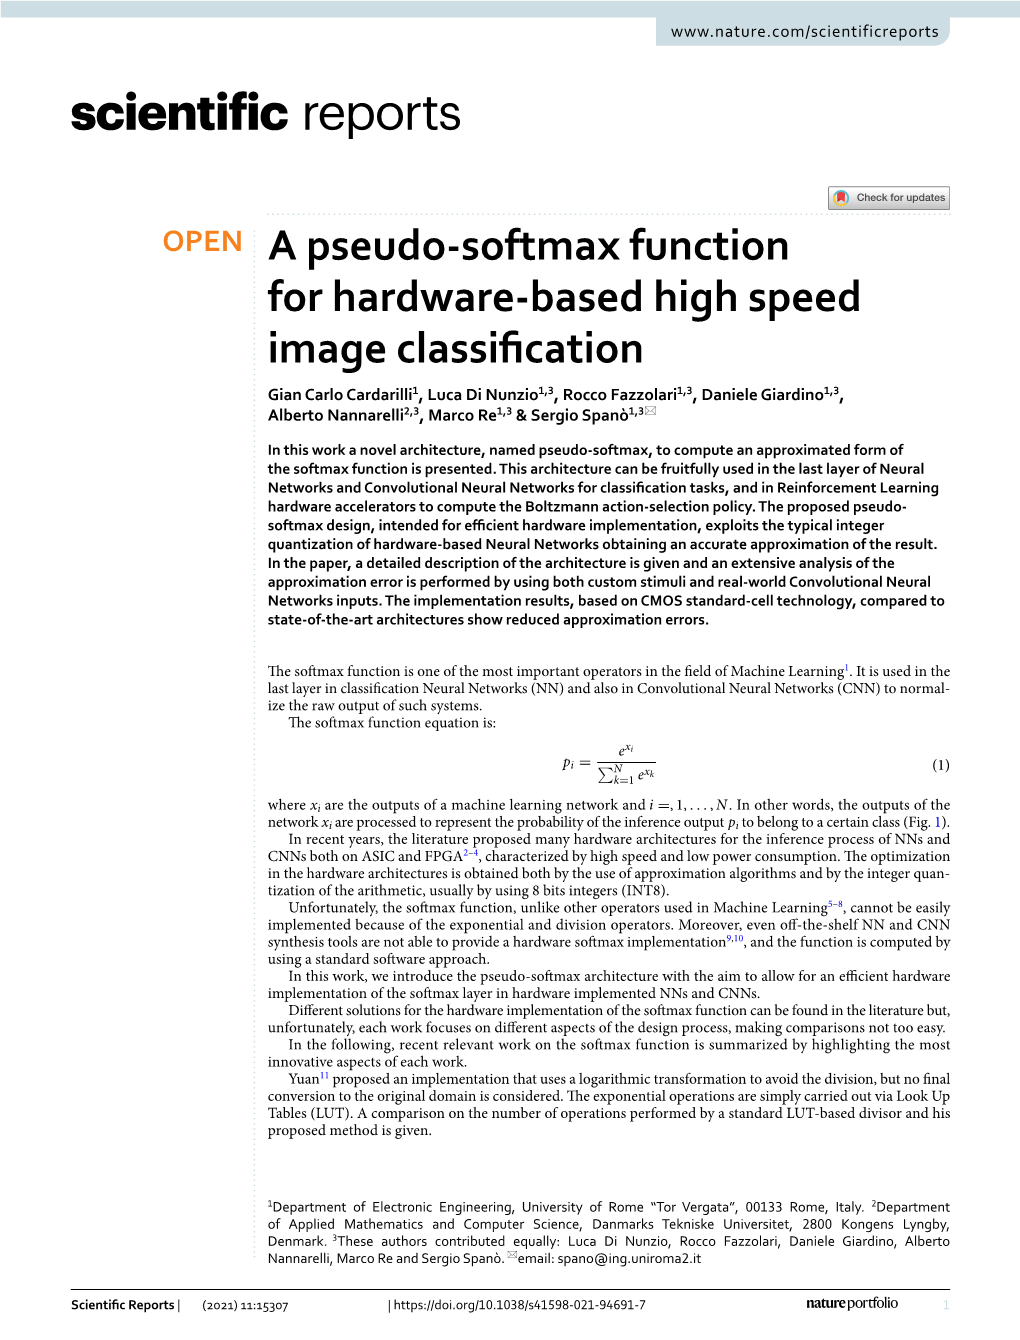 A Pseudo-Softmax Function for Hardware-Based High Speed Image Classification